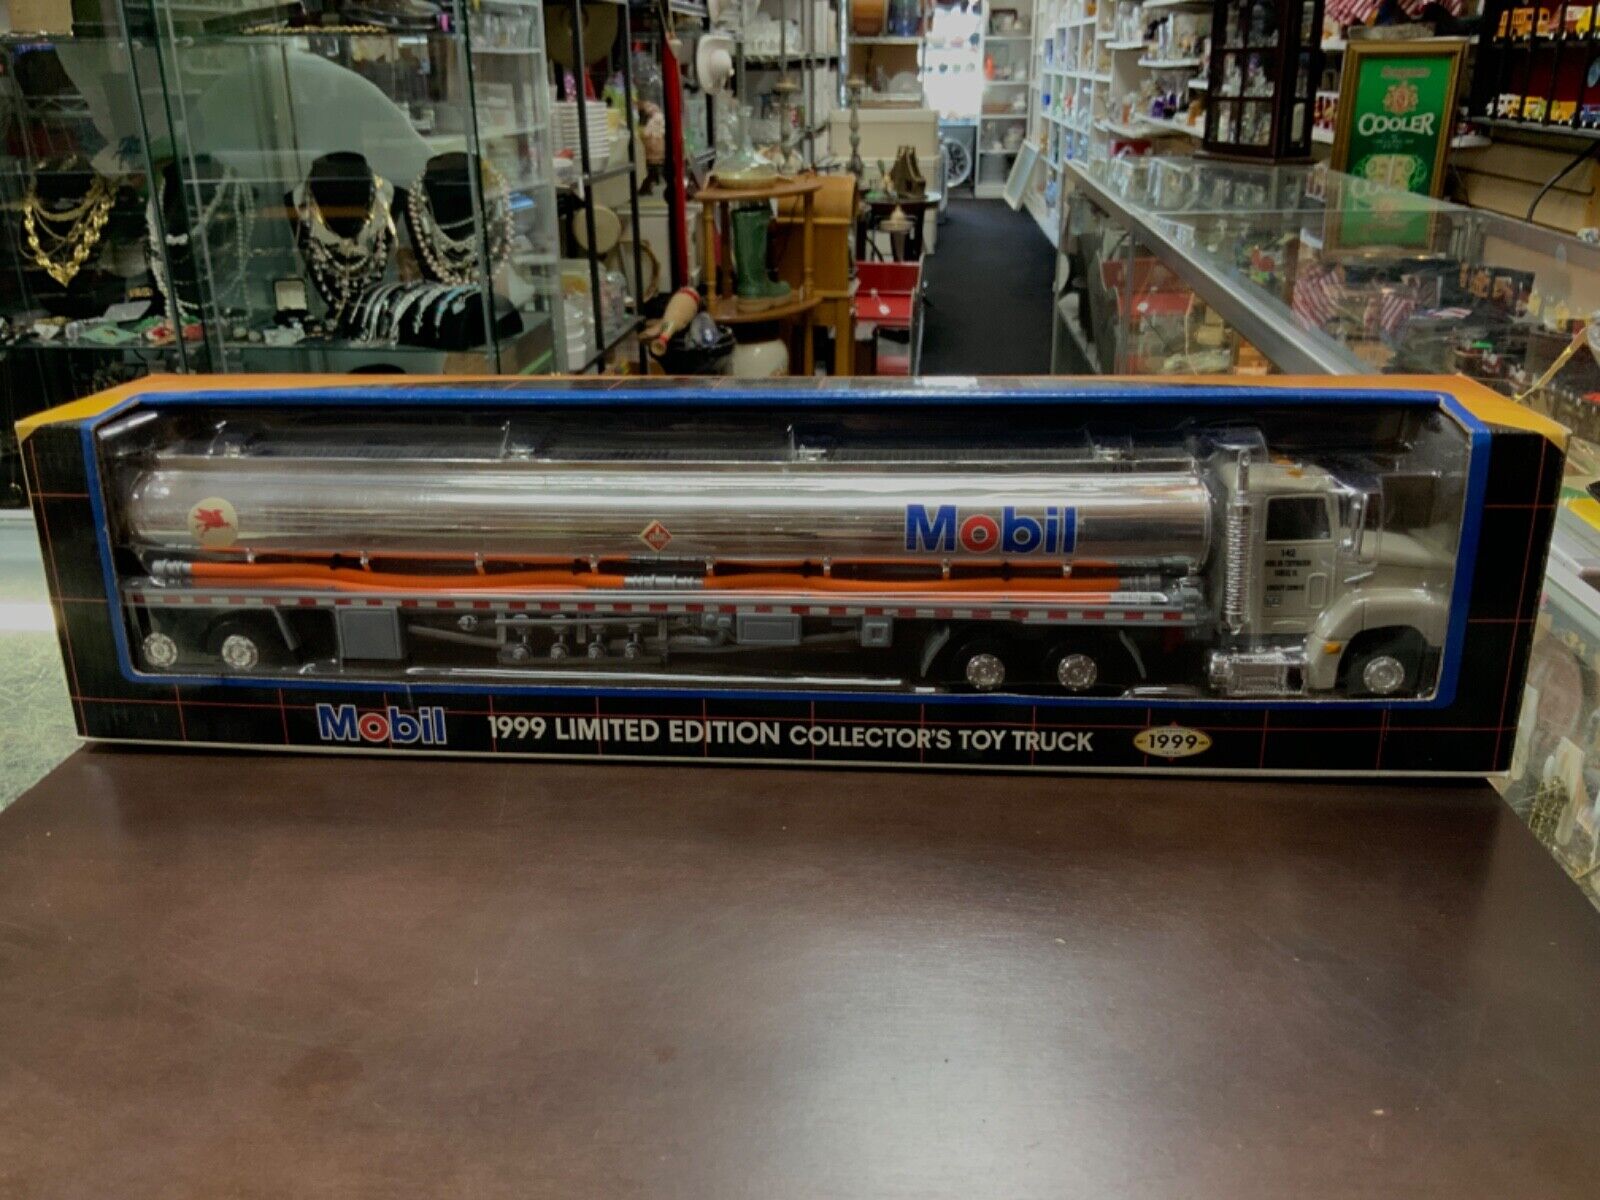 Mobil 1999 Limited Edition Collectors Toy Truck - preowned see photos (A)